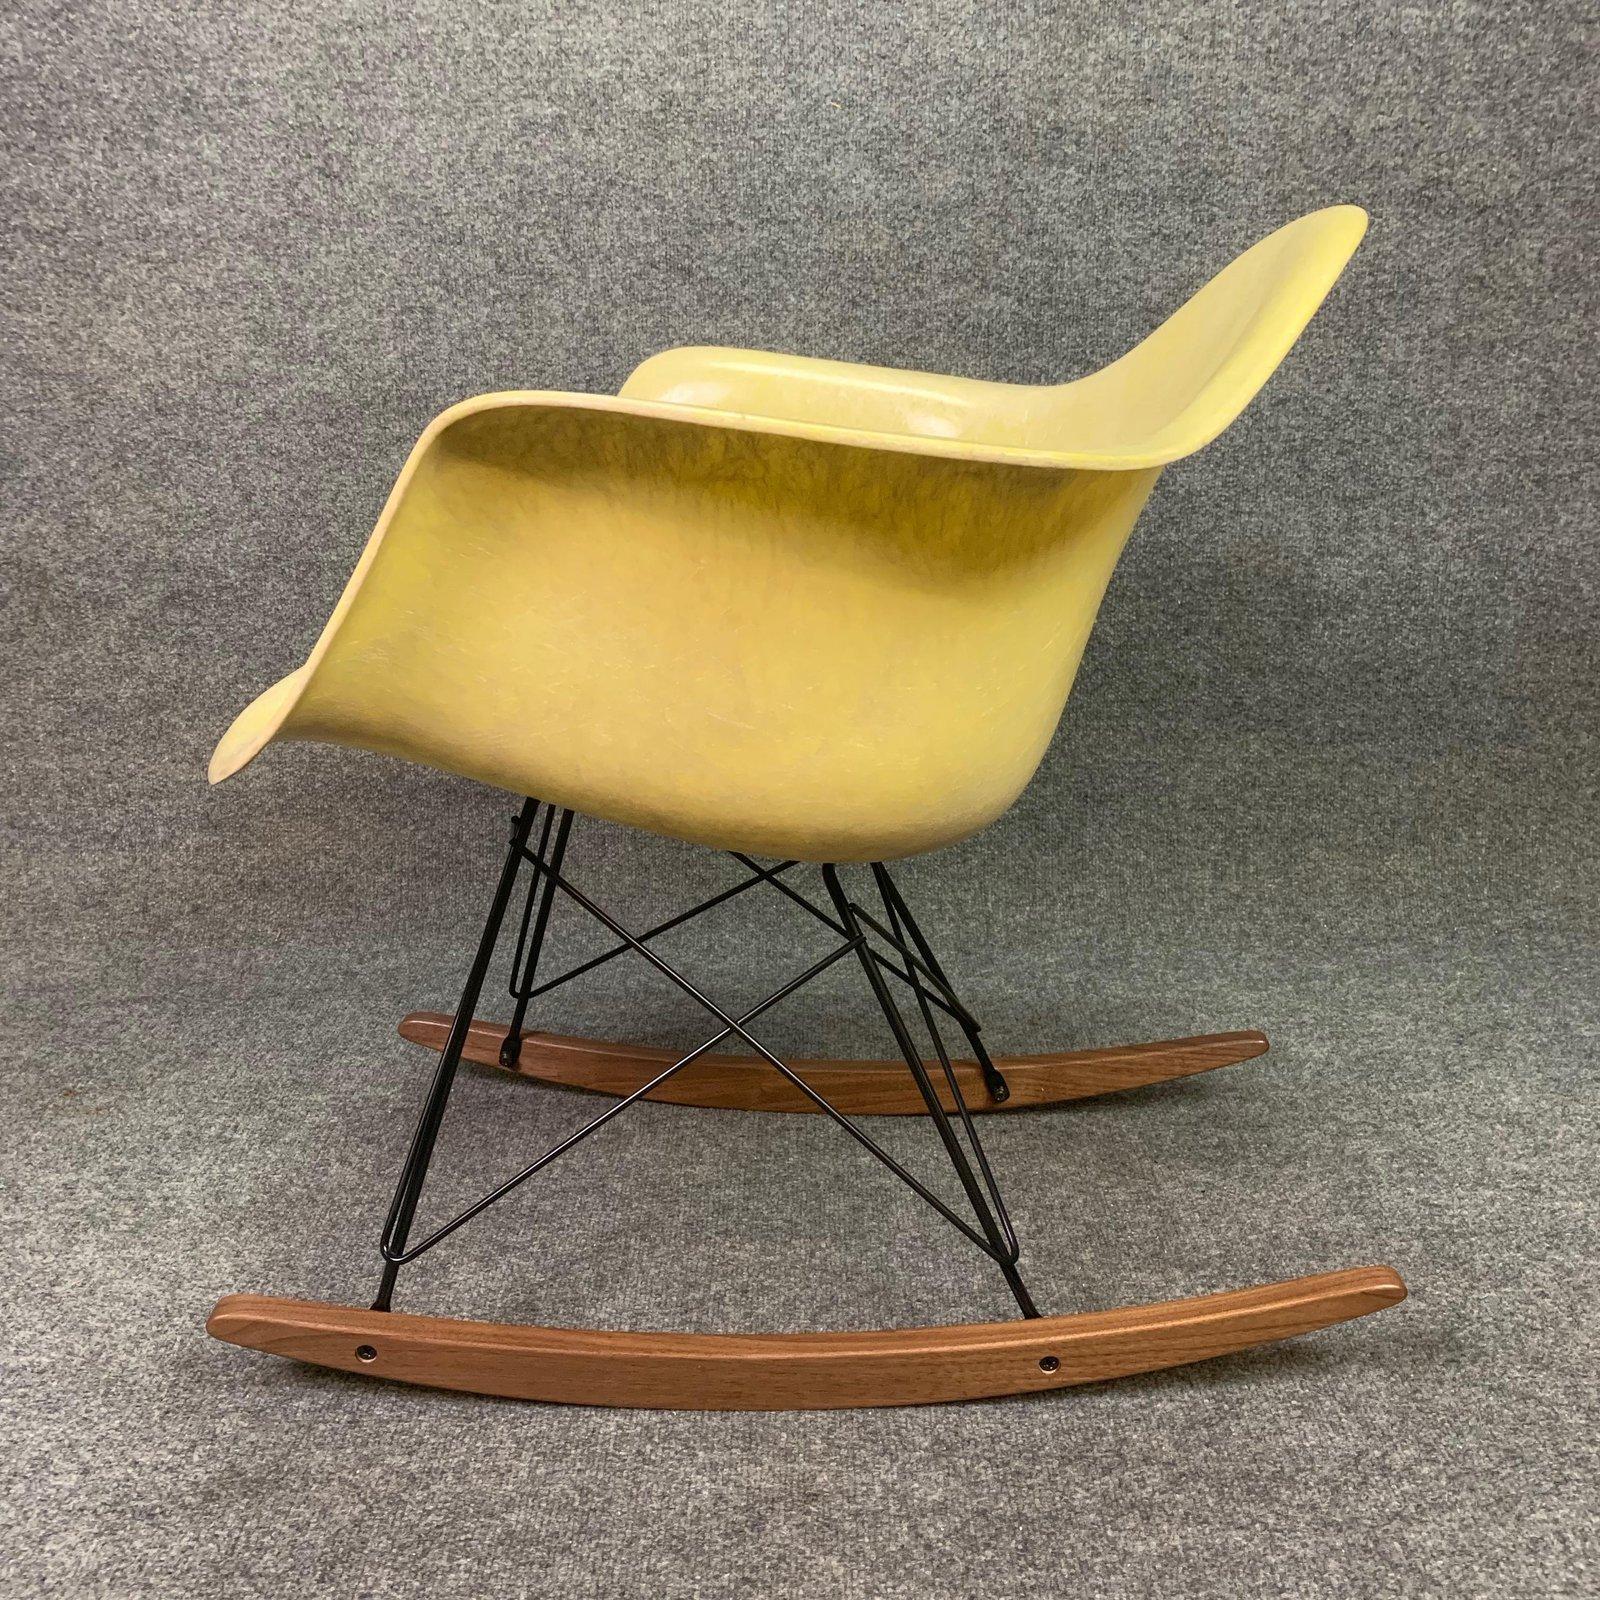 American Vintage Mid Century Fiberglass Rocking Chair by Charles Eames